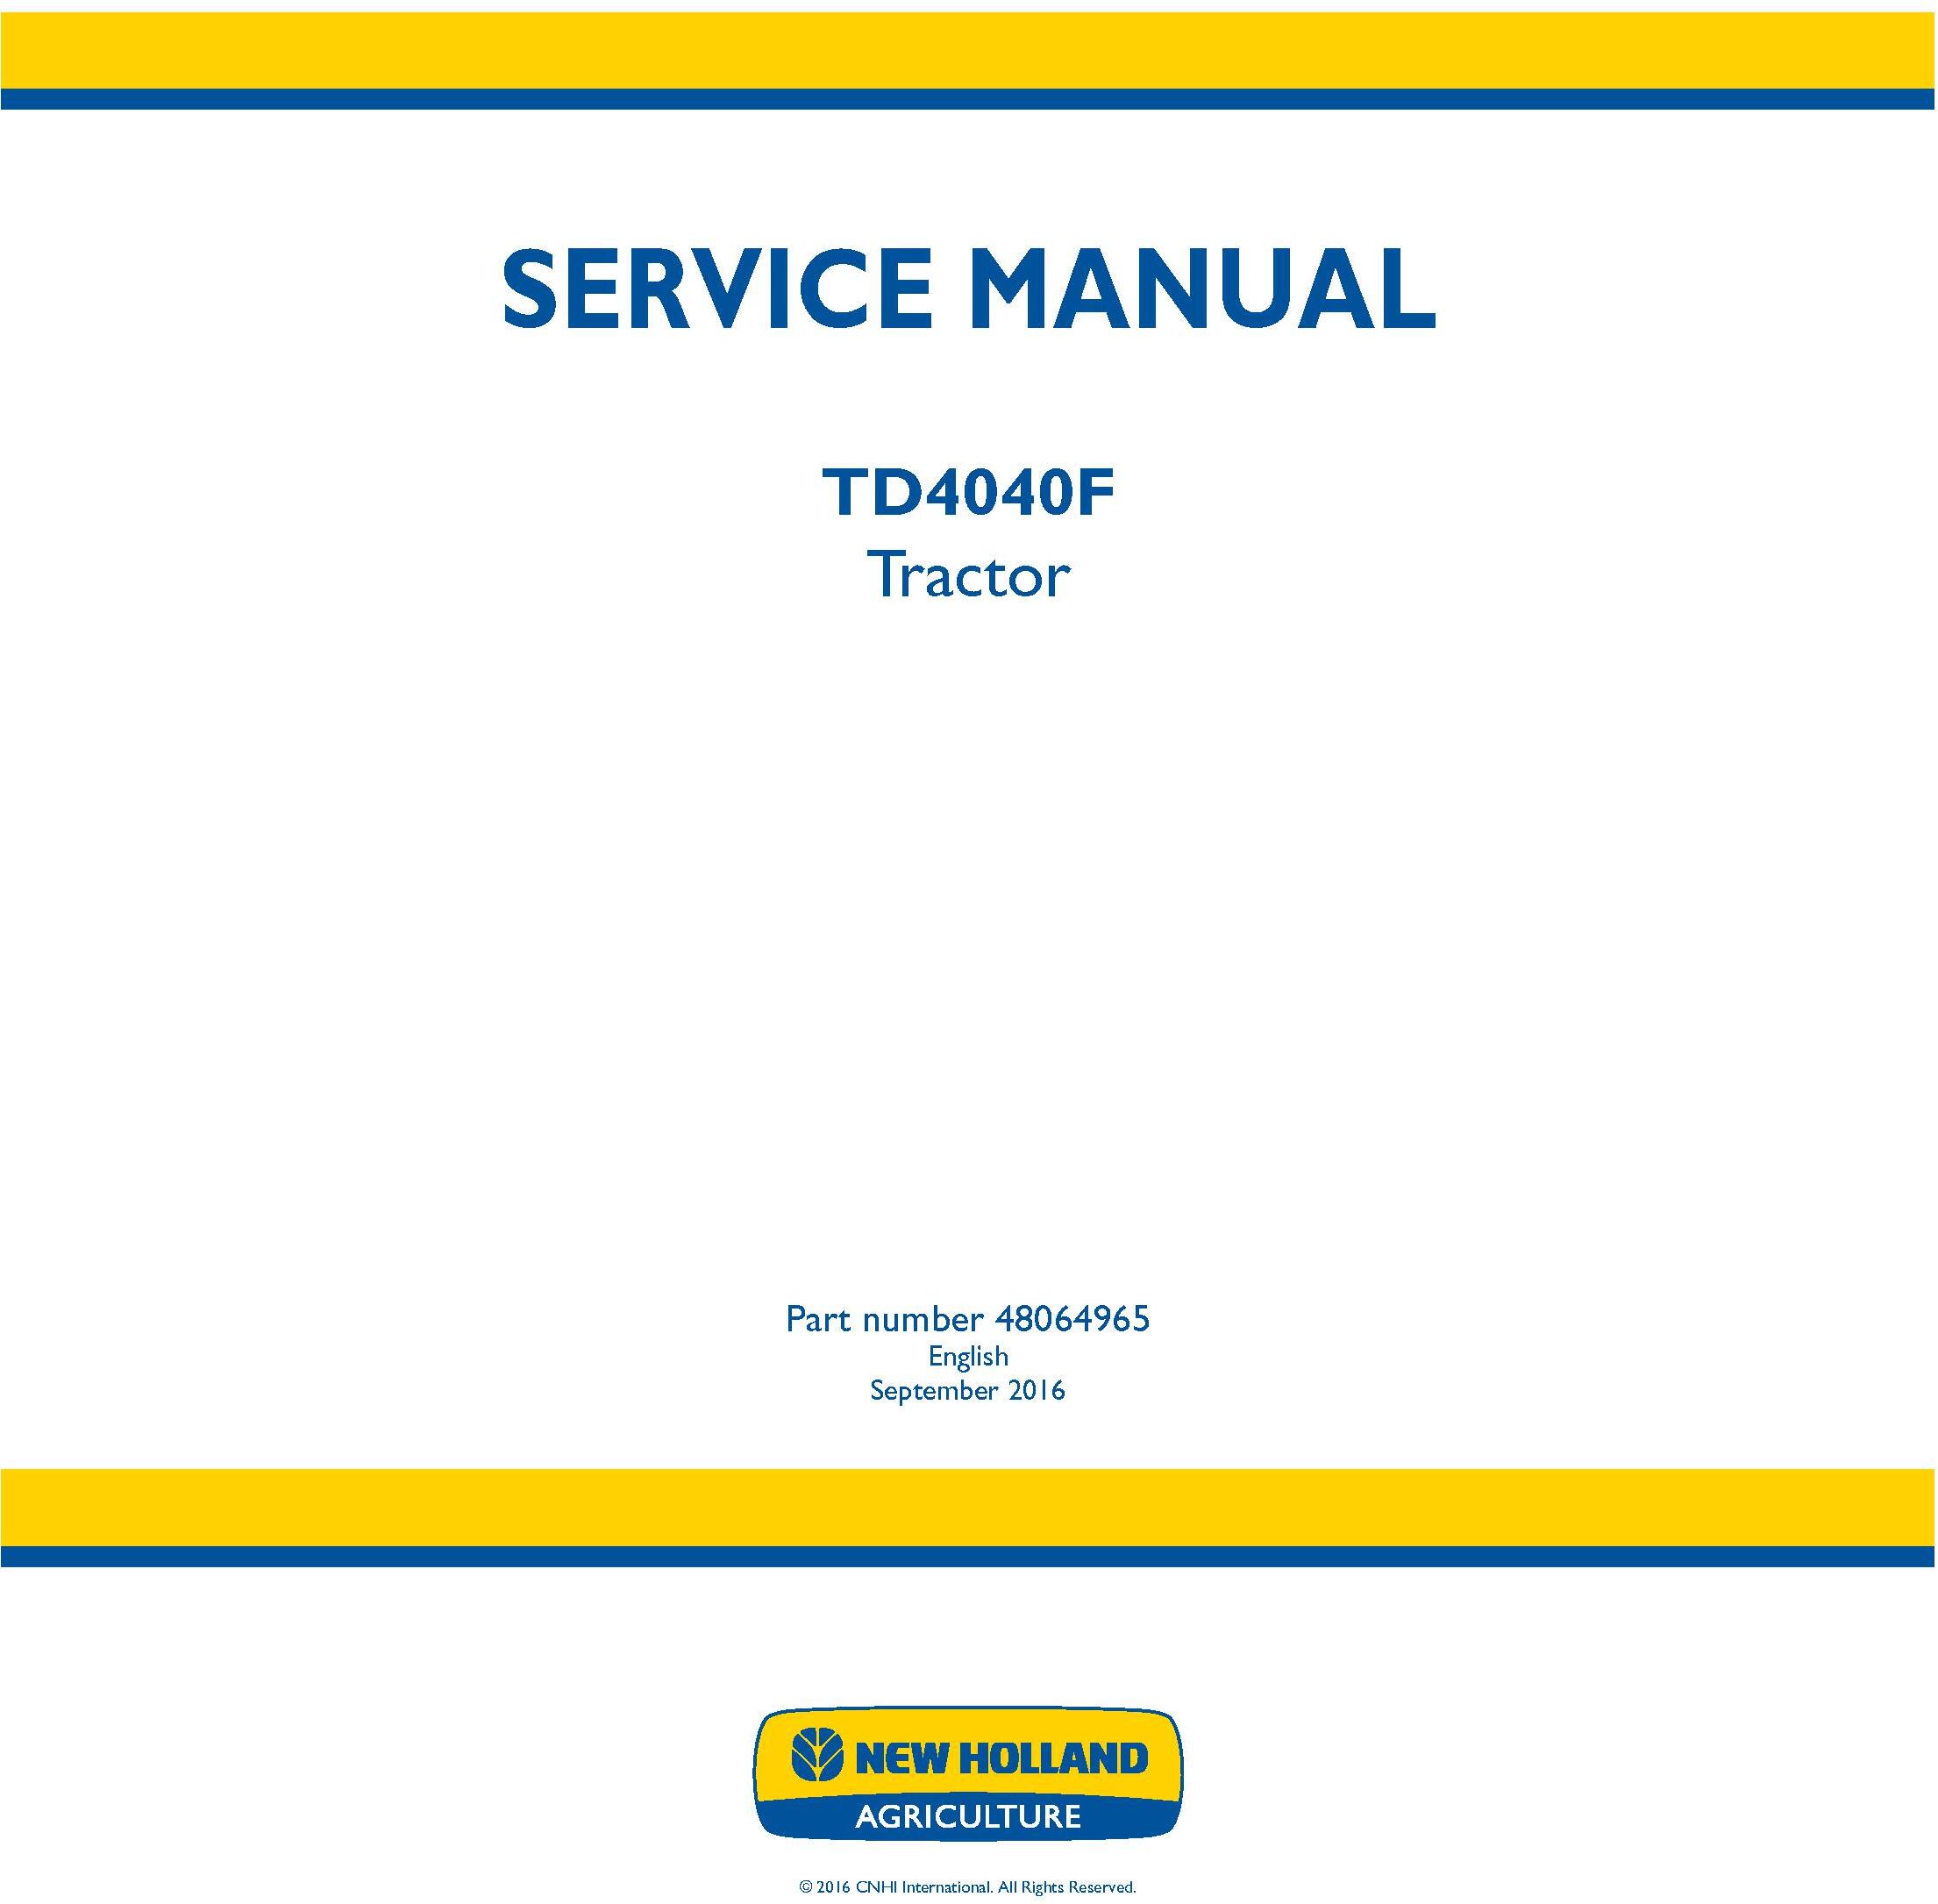 New Holland TD4040F Tractor Service Manual (North America)